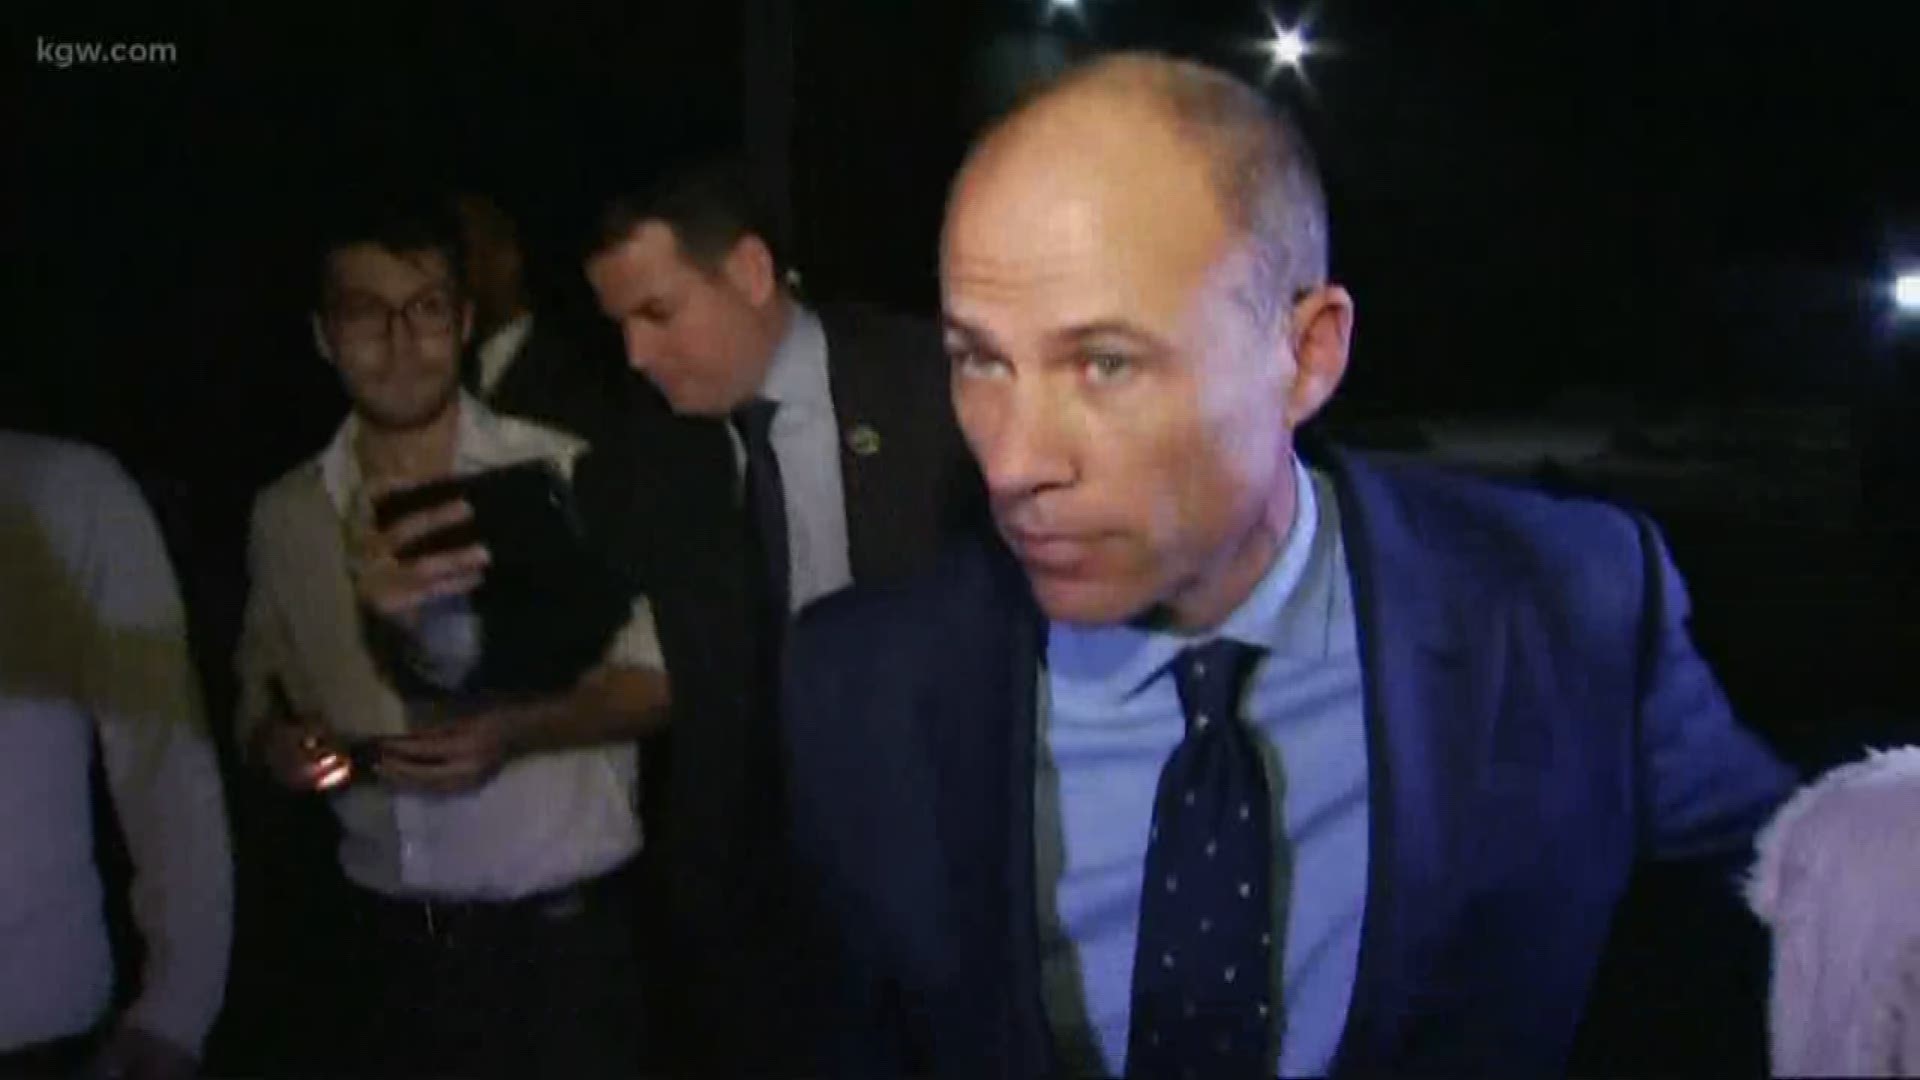 U.S. prosecutors on two coasts have charged President Donald Trump critic and attorney Michael Avenatti with extortion and bank and wire fraud. Spokesman Ciaran McEvoy says the lawyer best known for representing porn actress Stormy Daniels in lawsuits against Trump faces federal charges in New York and California.